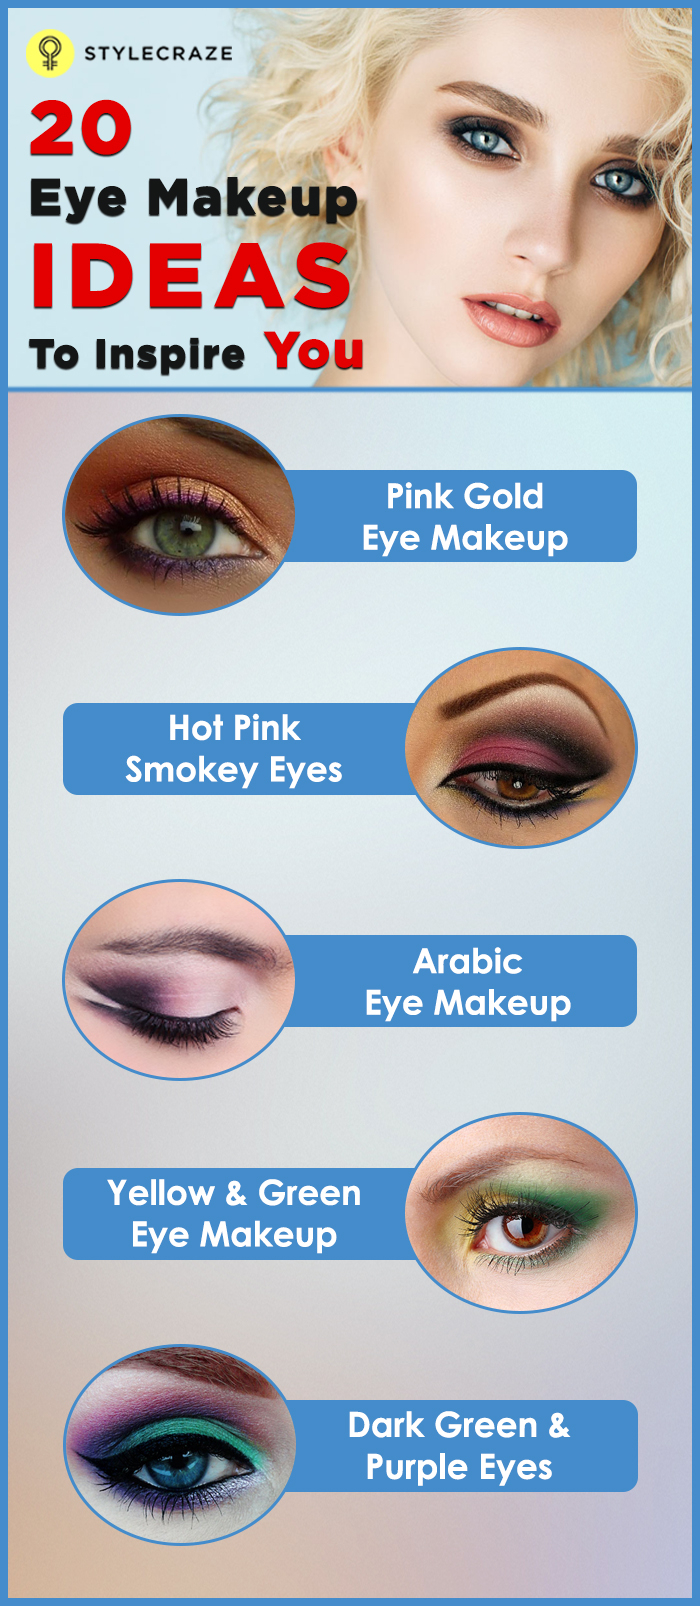 Arabic Eyes Makeup Pics Top 20 Beautiful And Sexy Eye Makeup Looks To Inspire You